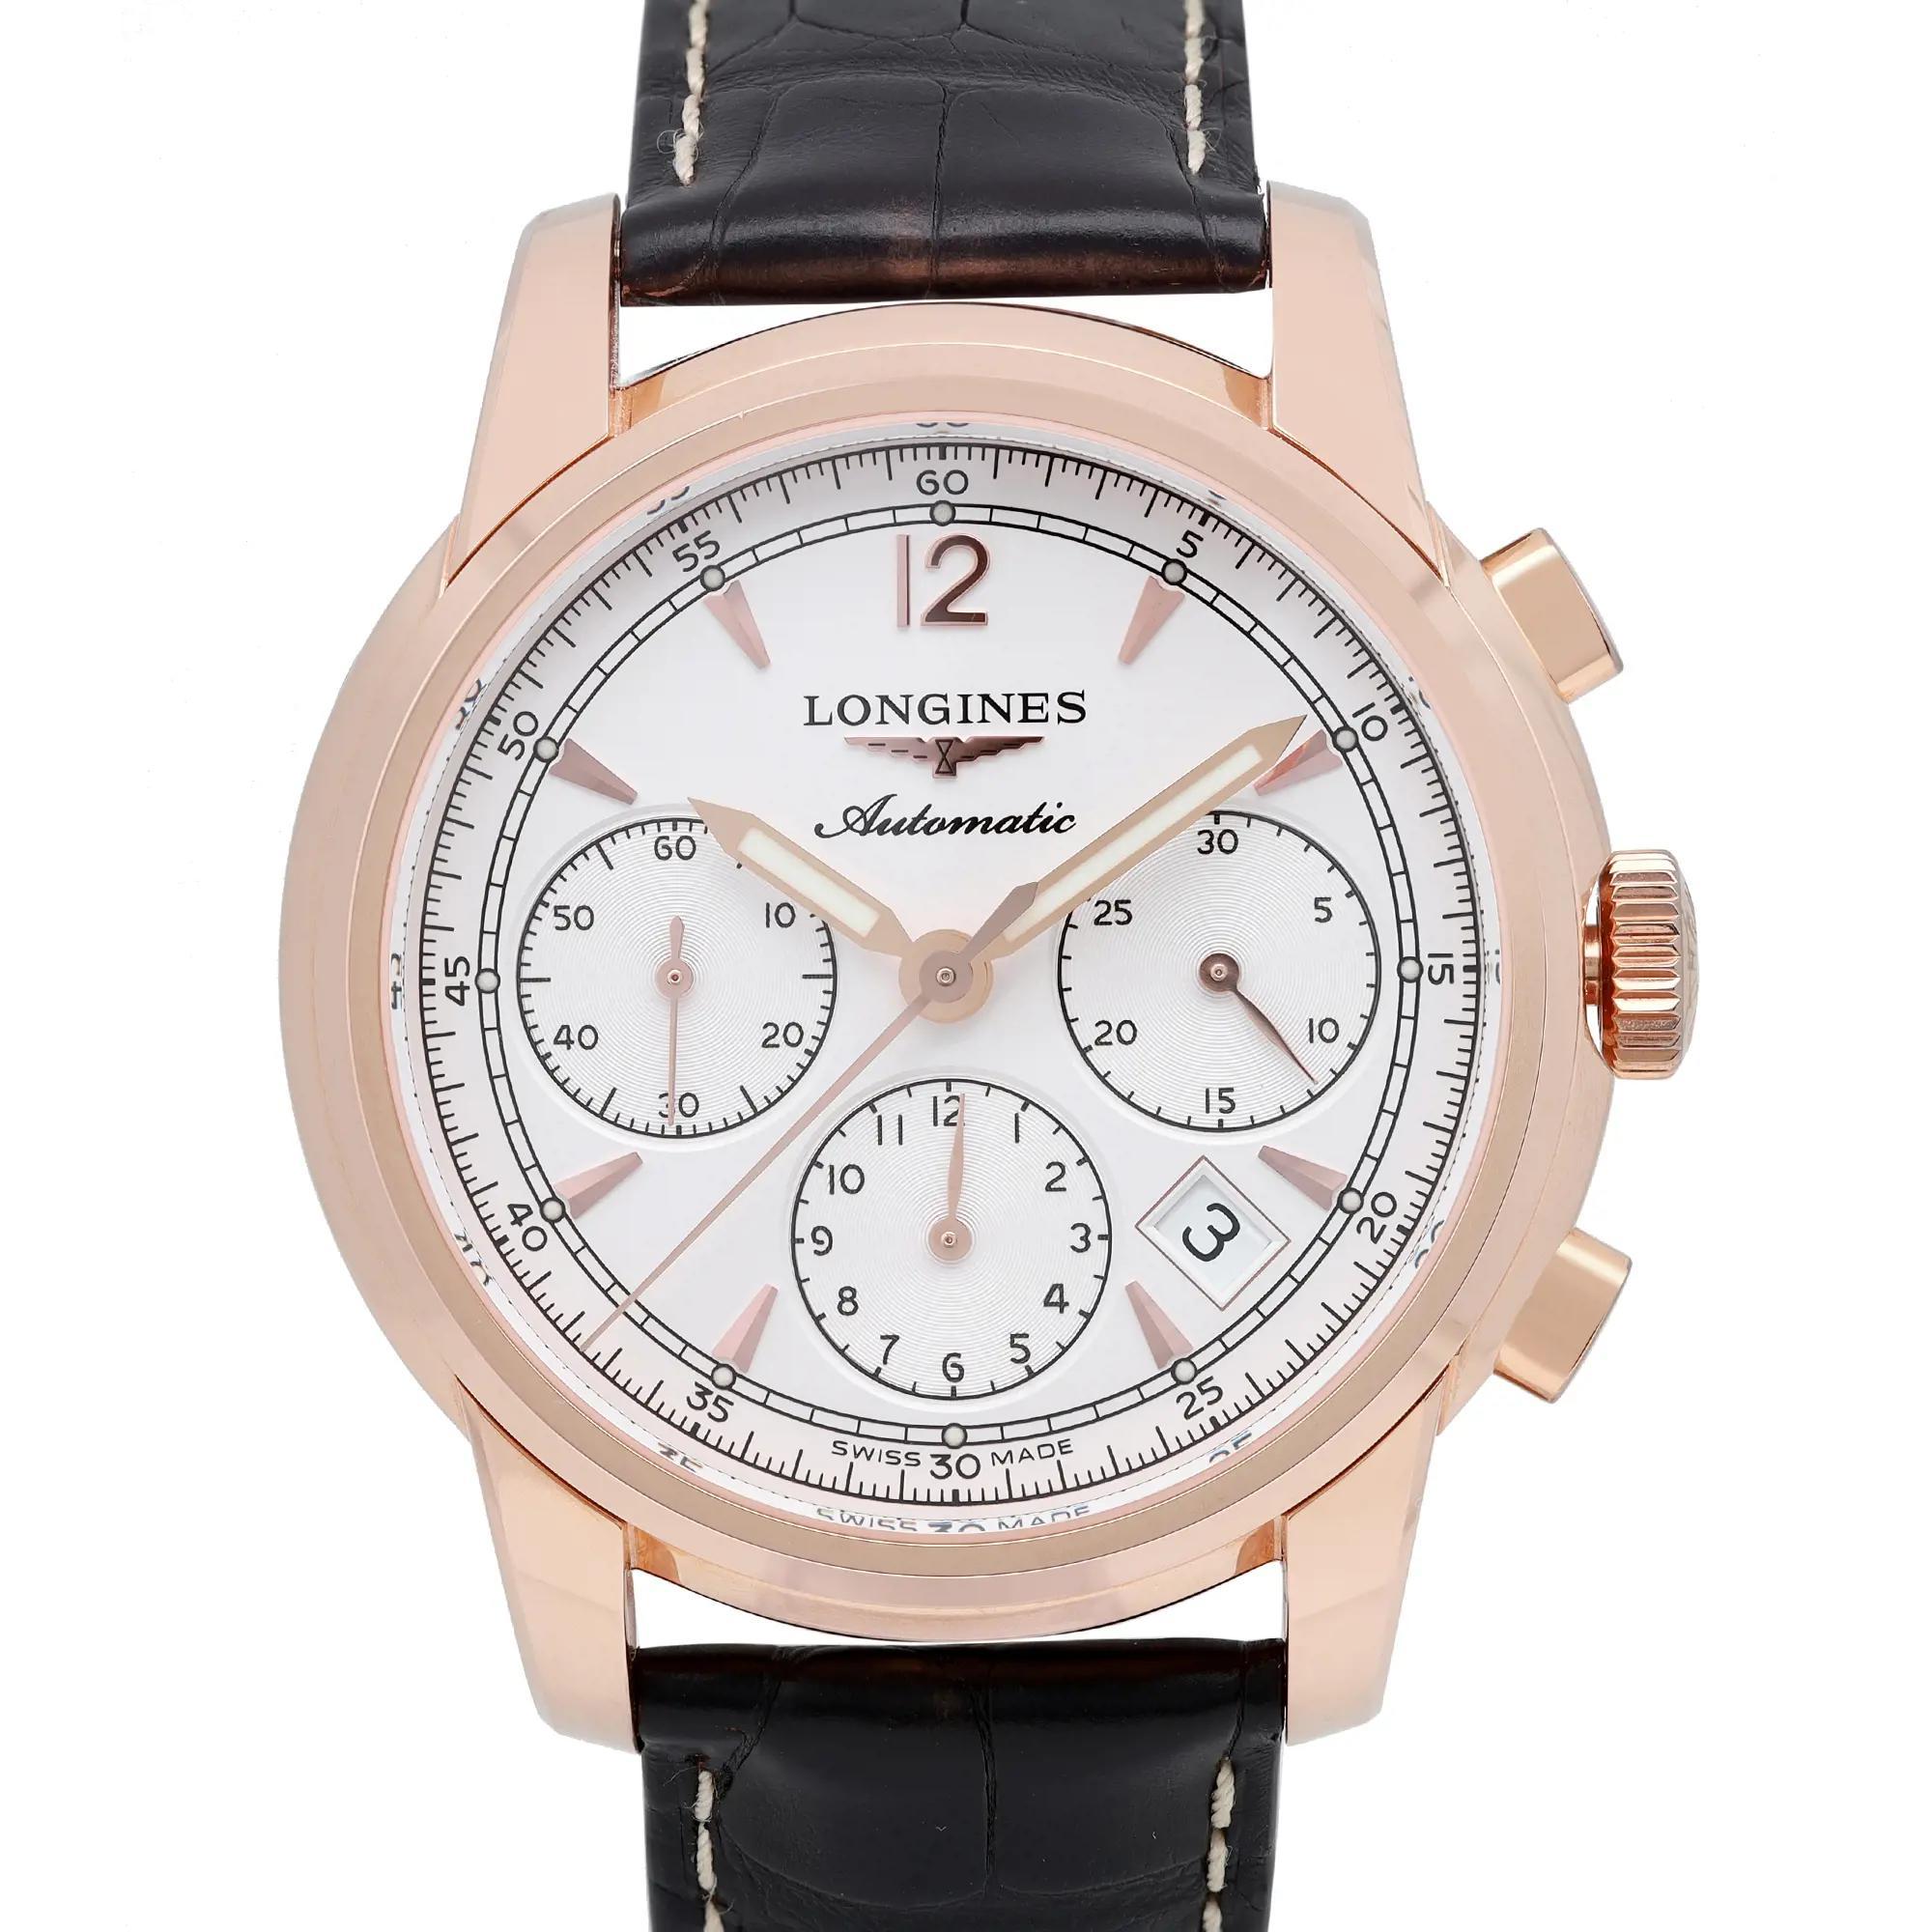 New. Comes with an original box and papers. Covered by 2 years warranty

 Brand: Longines  Type: Wristwatch  Department: Men  Model Number: L2.752.8.72.3  Country/Region of Manufacture: Switzerland  Style: Luxury  Model: Longines Saint-Imier 